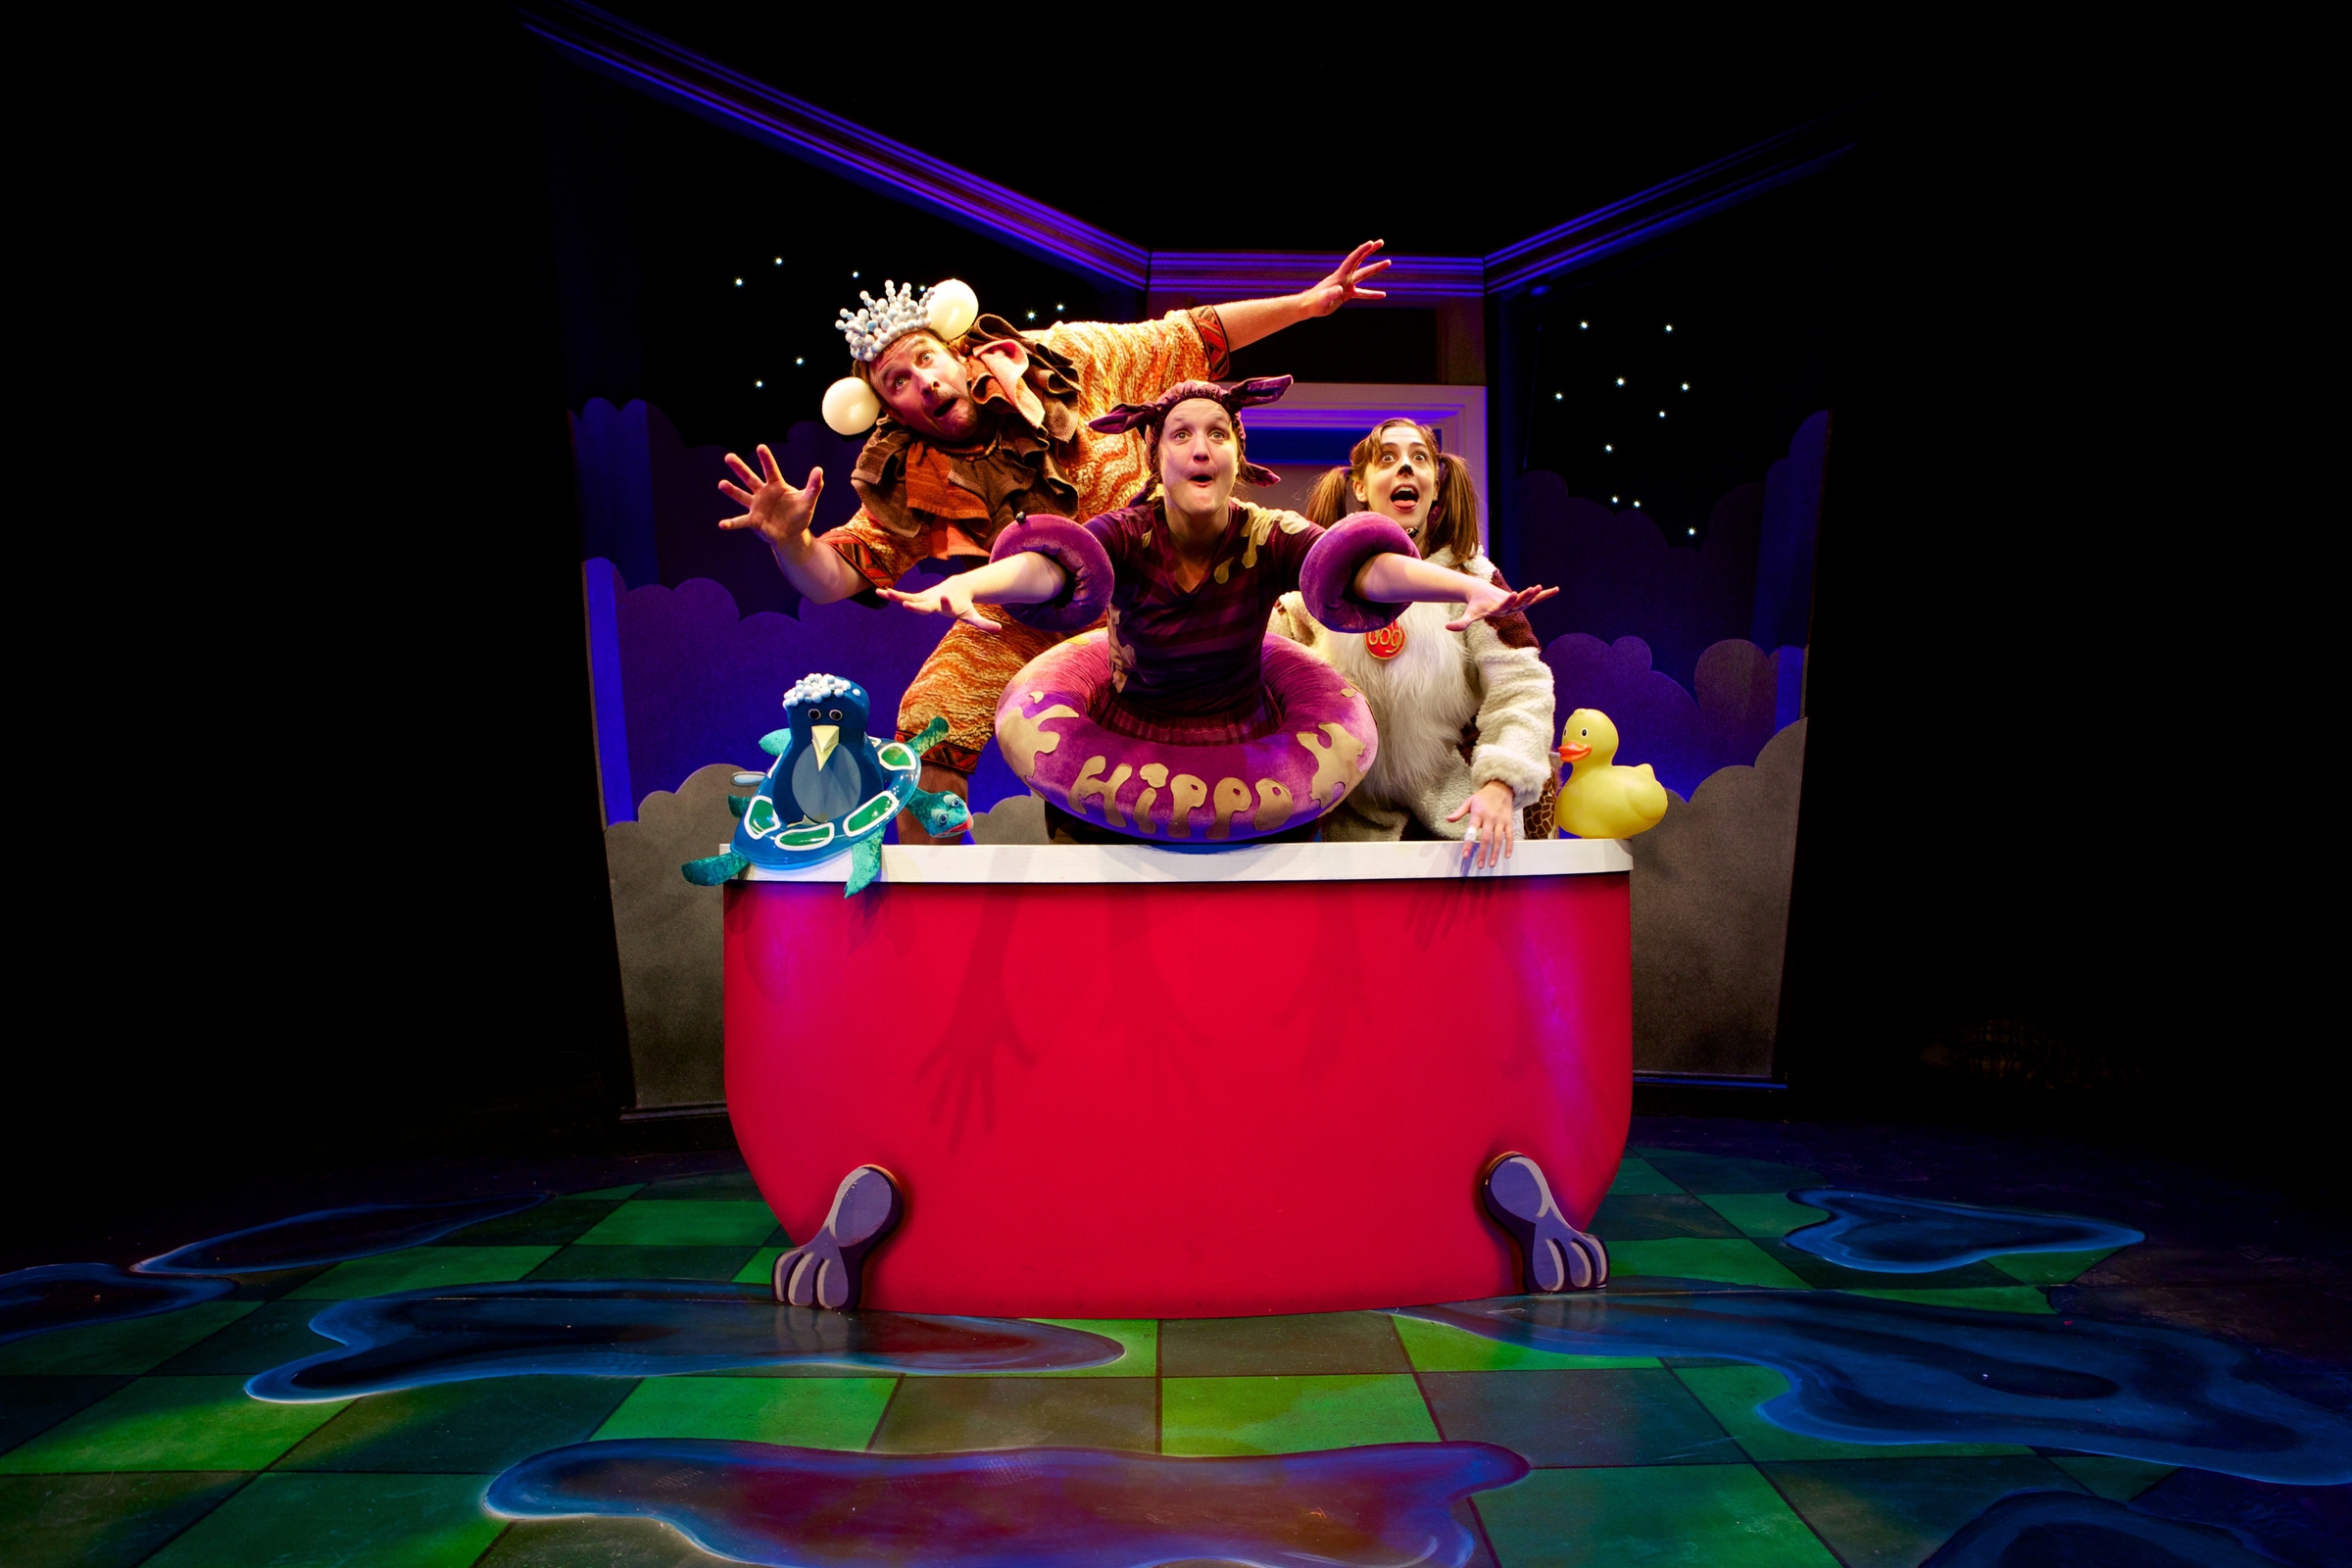 Promo image for Big Red Bath. Three people in costume are standing in a red bath. There is a woman dressed as a dog, a man dressed as a lion and a woman dressed as a purple creature. Two of them are waving and they have looks of amazement on their faces.